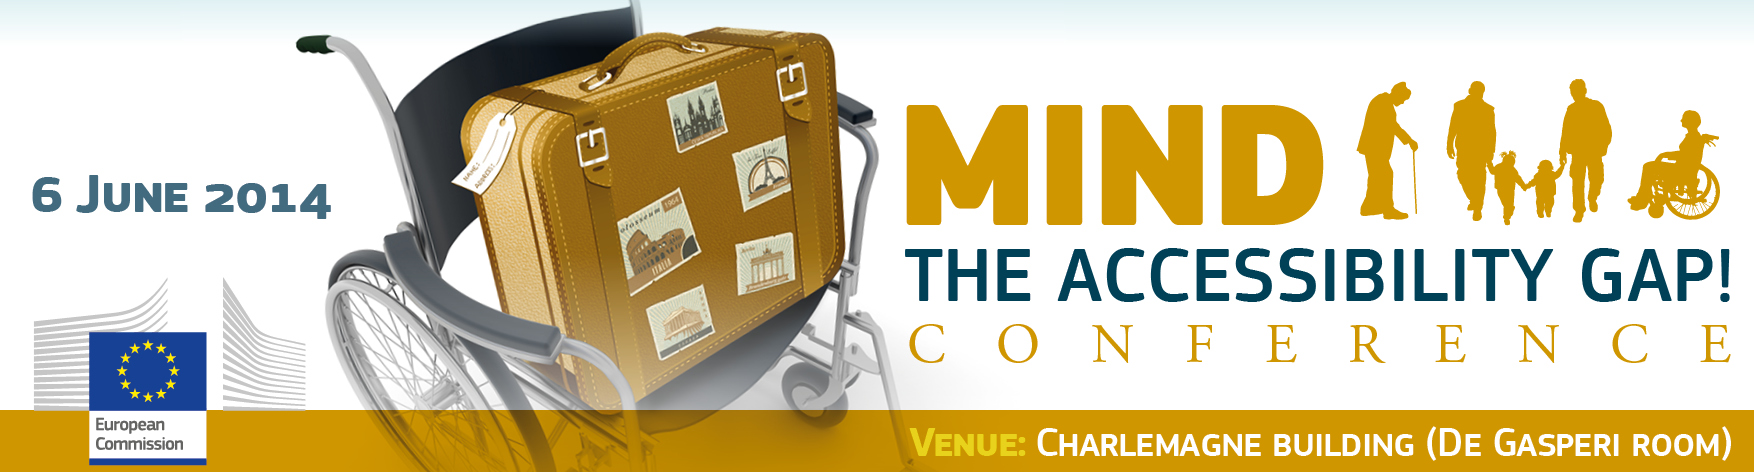 EU Conference, 6 June 2014, Mind the Accessibility Gap banner, with wheelchair and suitcase 